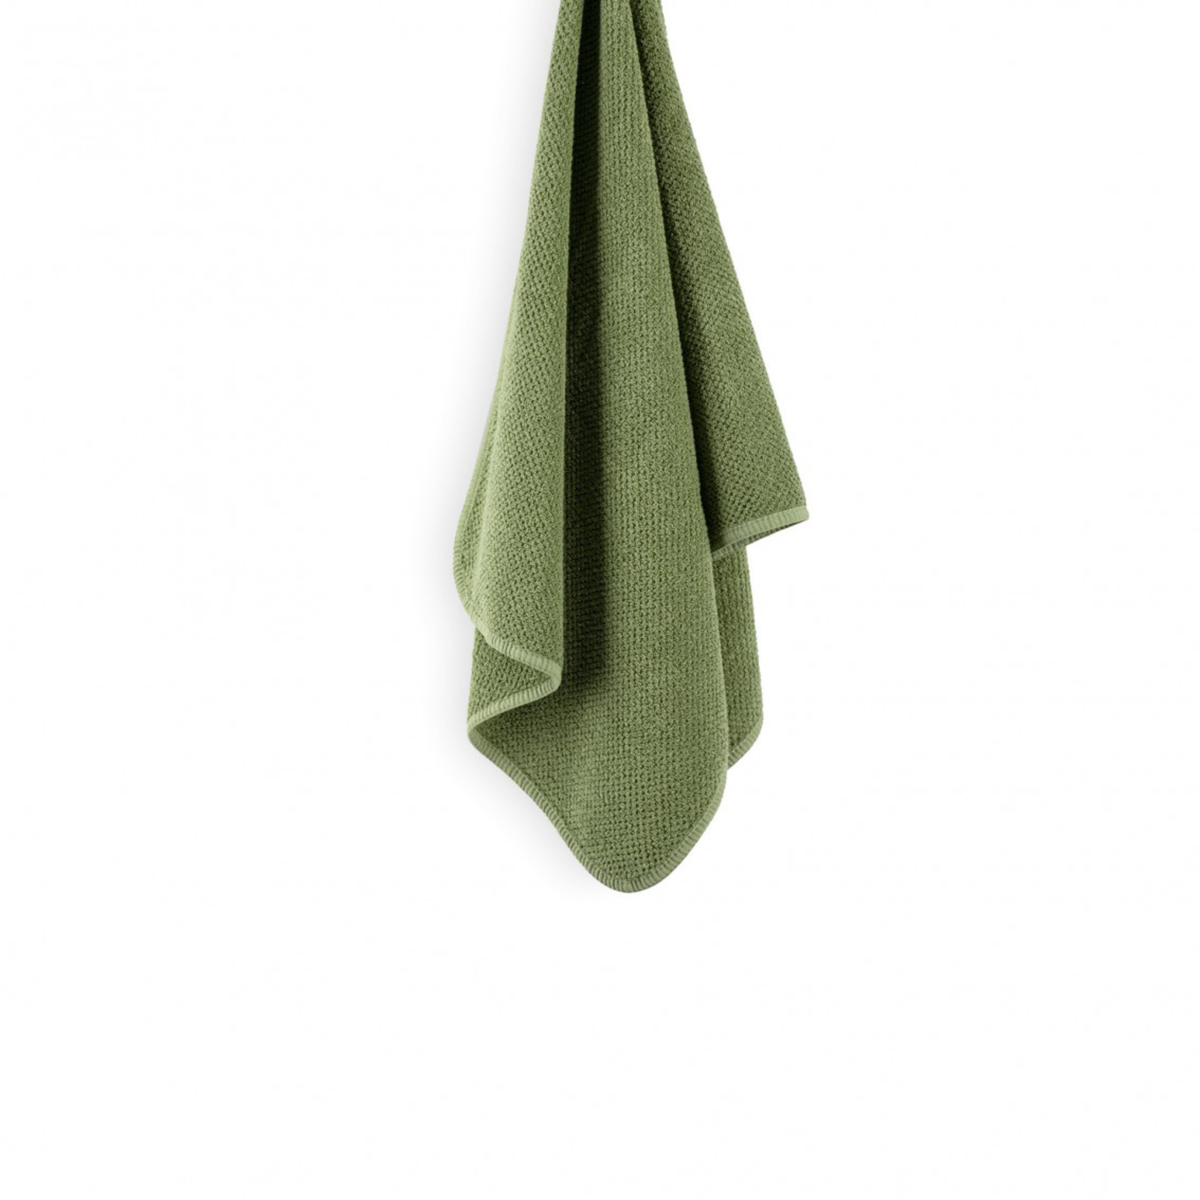 Graccioza Bee Waffle Towel in Jade Color Hanging on a White Background